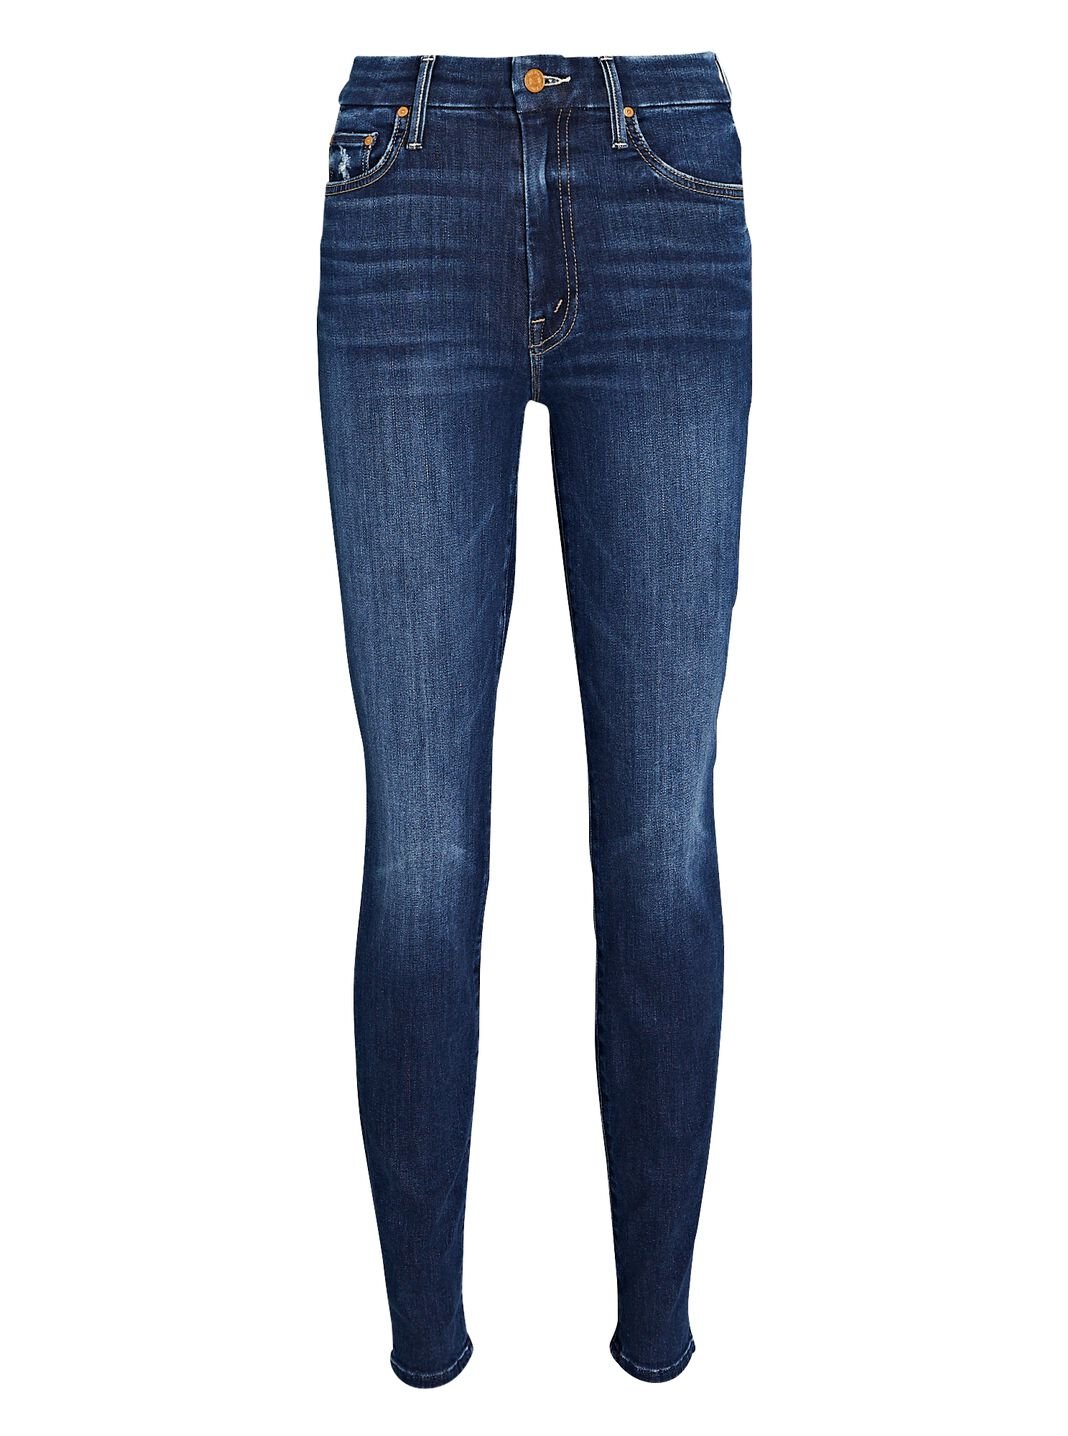 The High Waisted Looker Jeans